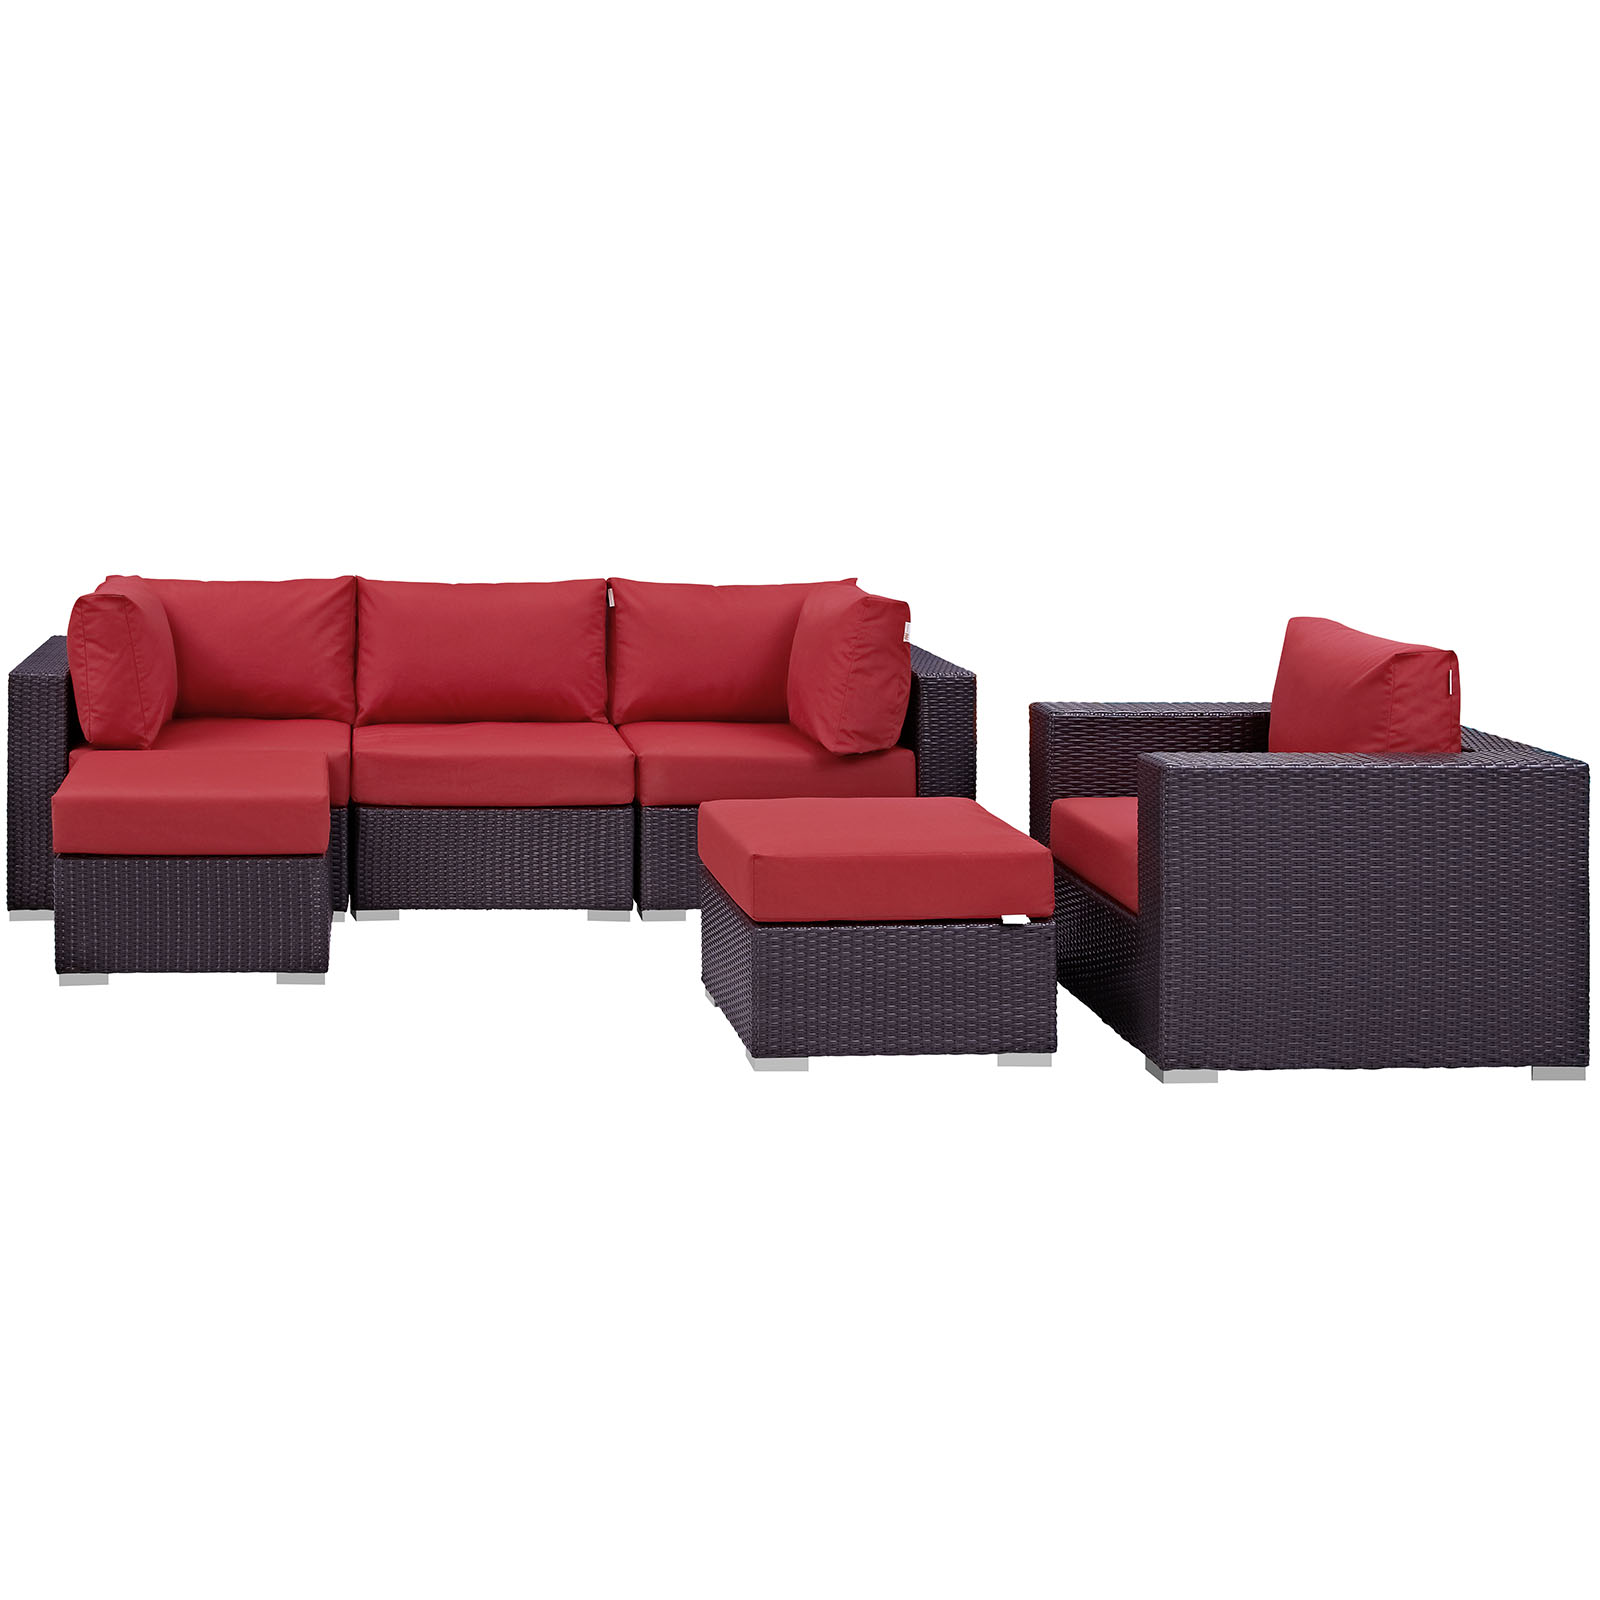 Modway Convene 6 Piece Patio Sofa Set in Espresso and Red - image 4 of 8